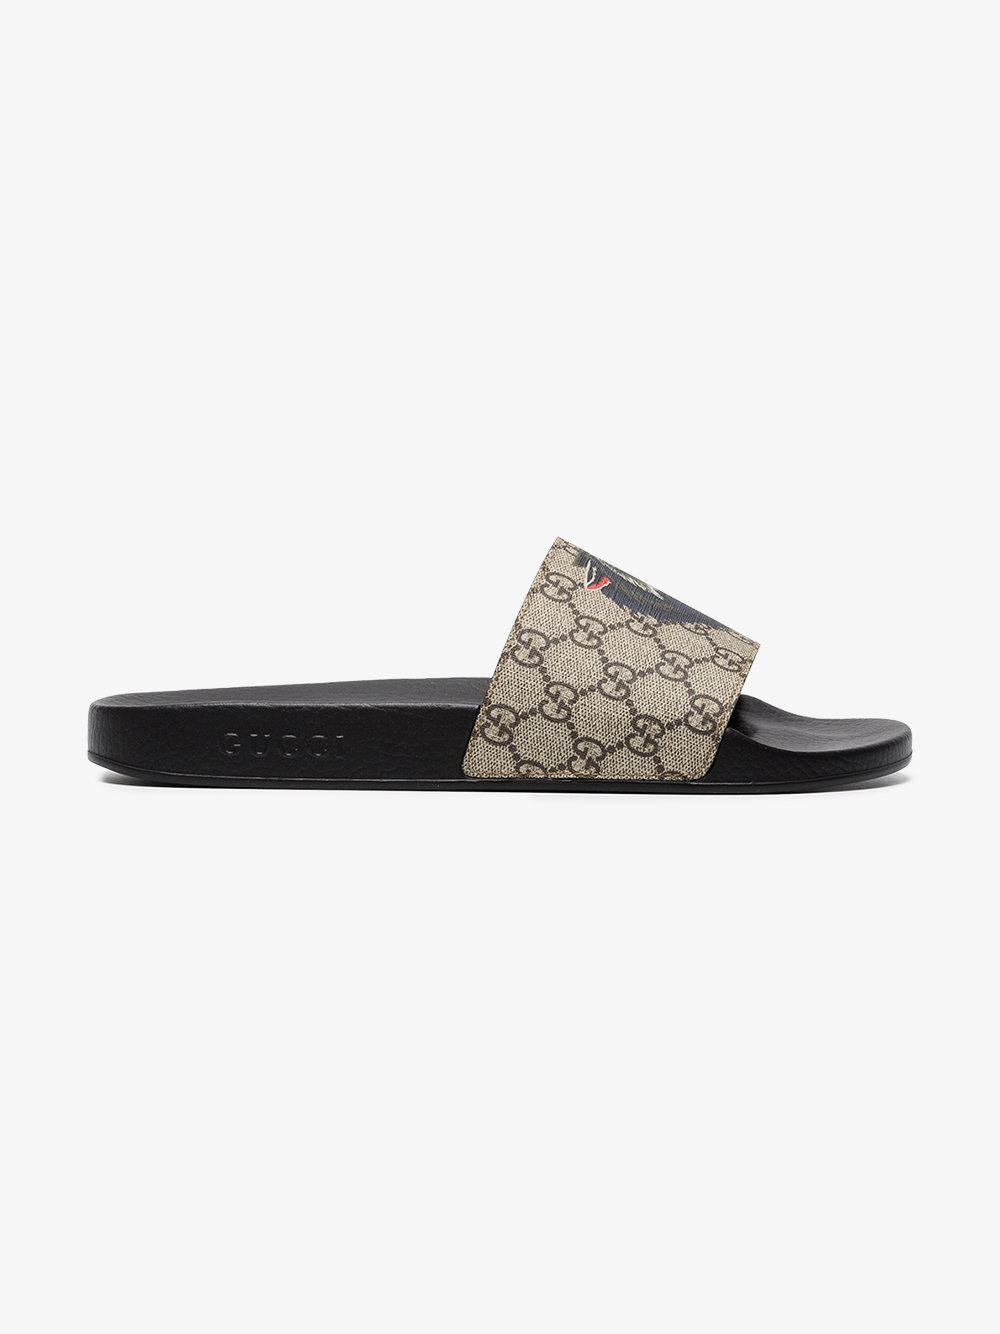 Gucci Canvas GG Supreme Slides With Wolf for Men - Lyst